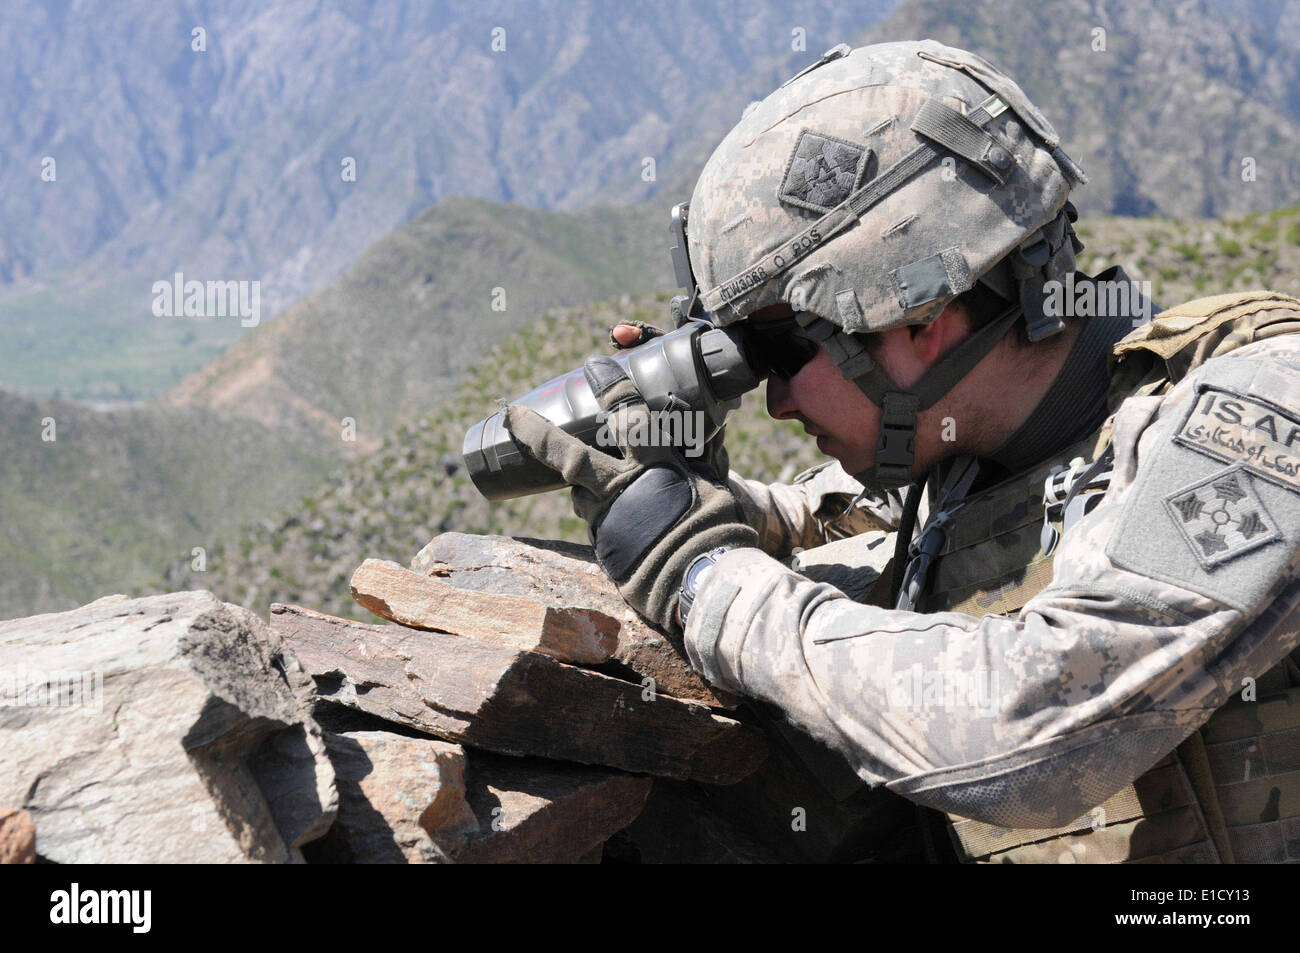 U.S. Army Pvt. Michael S. Walters monitors an Afghan National Army visit to Nishigam village in the eastern Kunar province of A Stock Photo